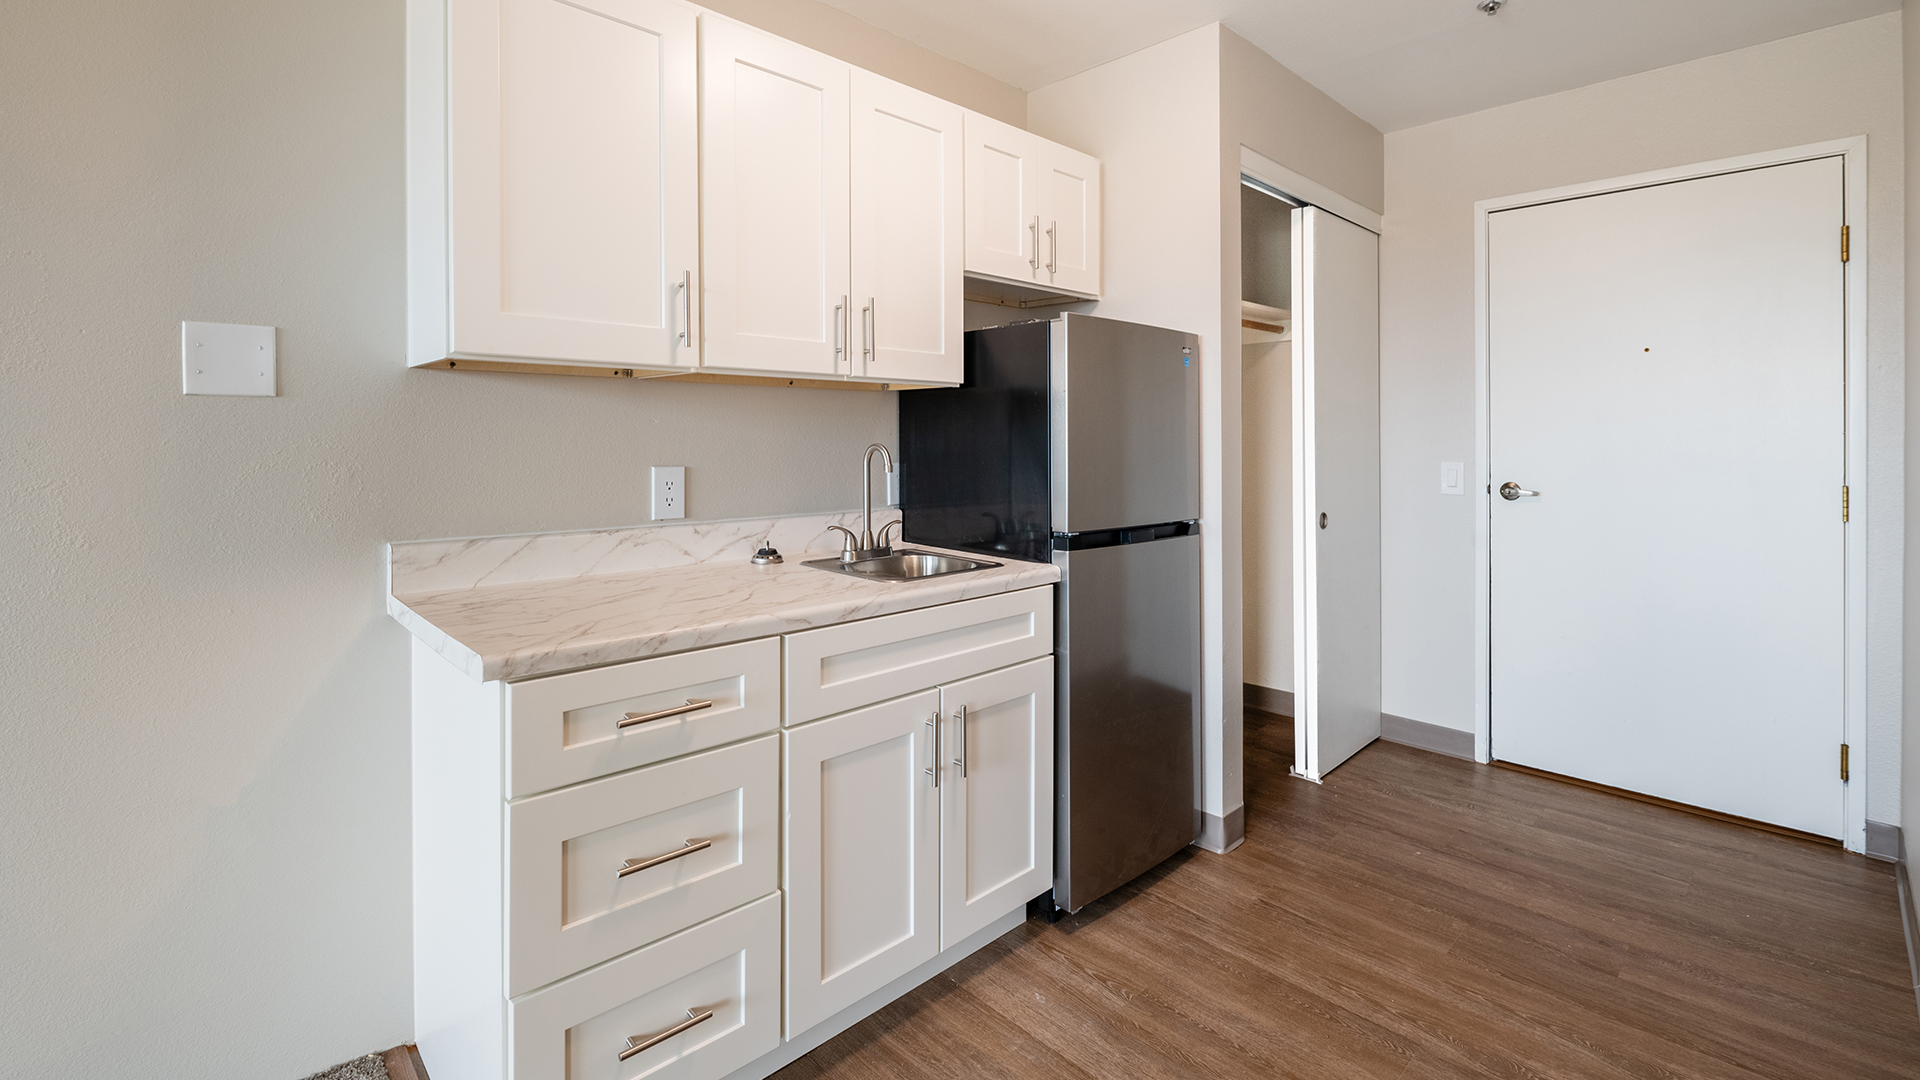 Holiday Elm Park Estates apartment kitchen equipped with modern appliances and cabinets